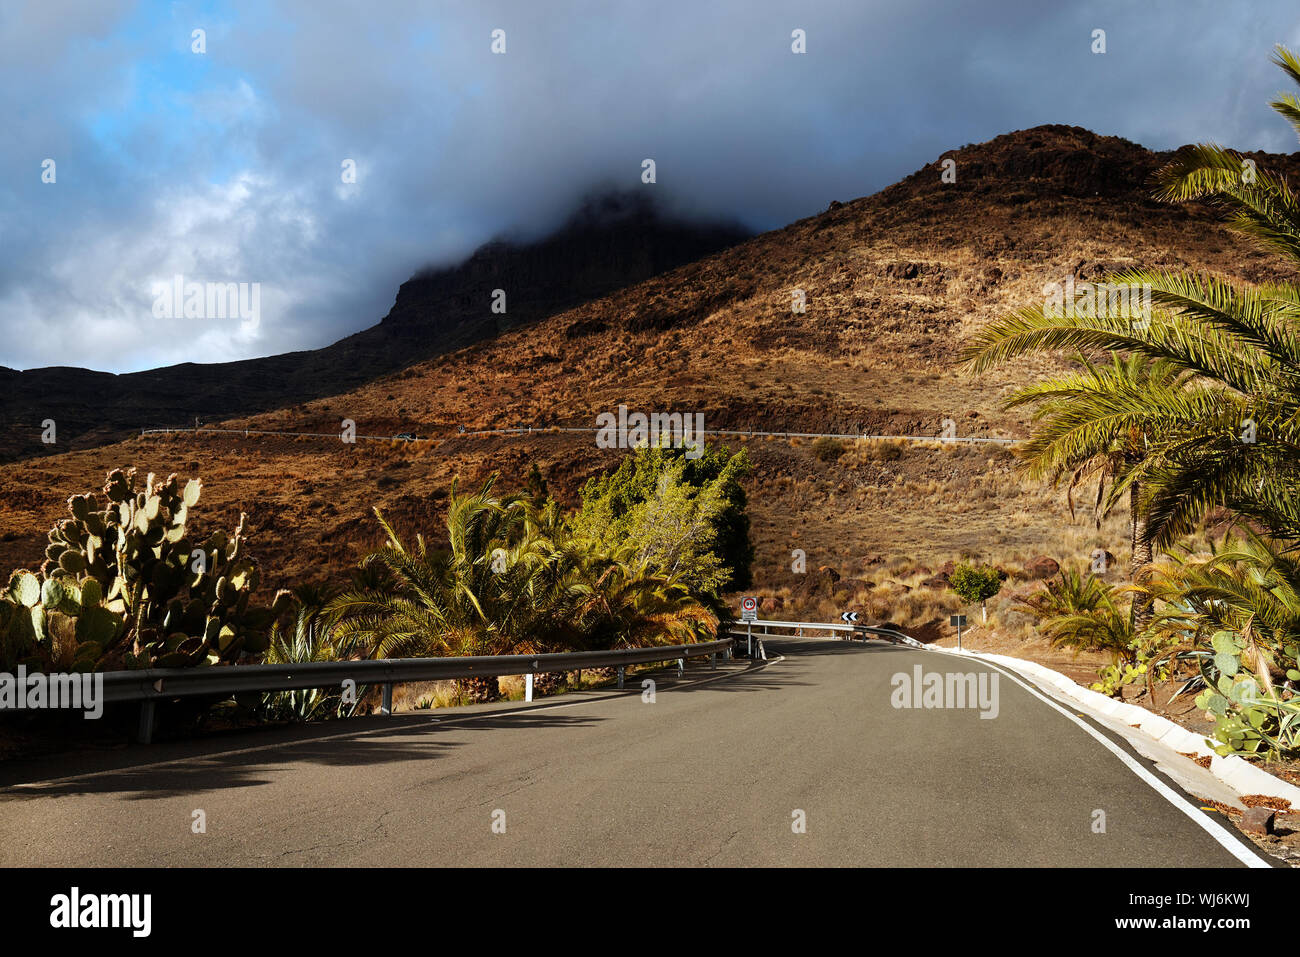 Diminishing Perspective Of Road Passing Through Mountains Against Cloudy Sky Stock Photo